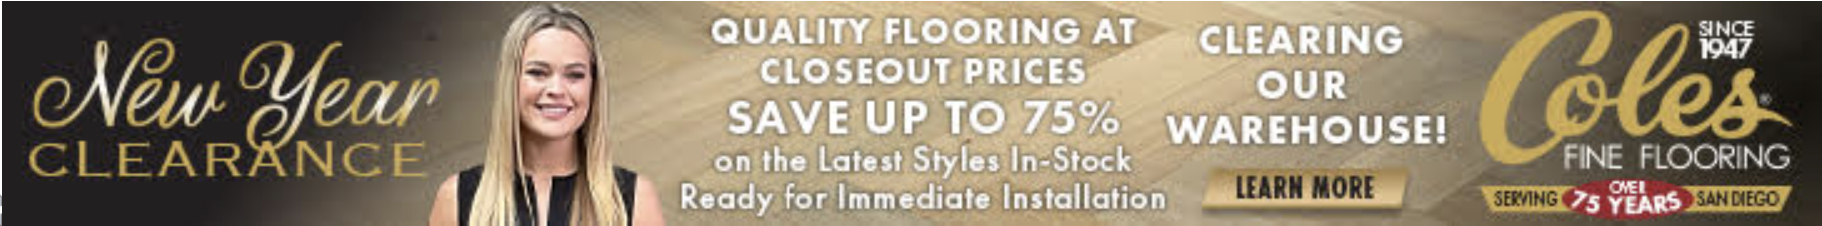 Coles Fine Flooring 2023 New Year Clearance 